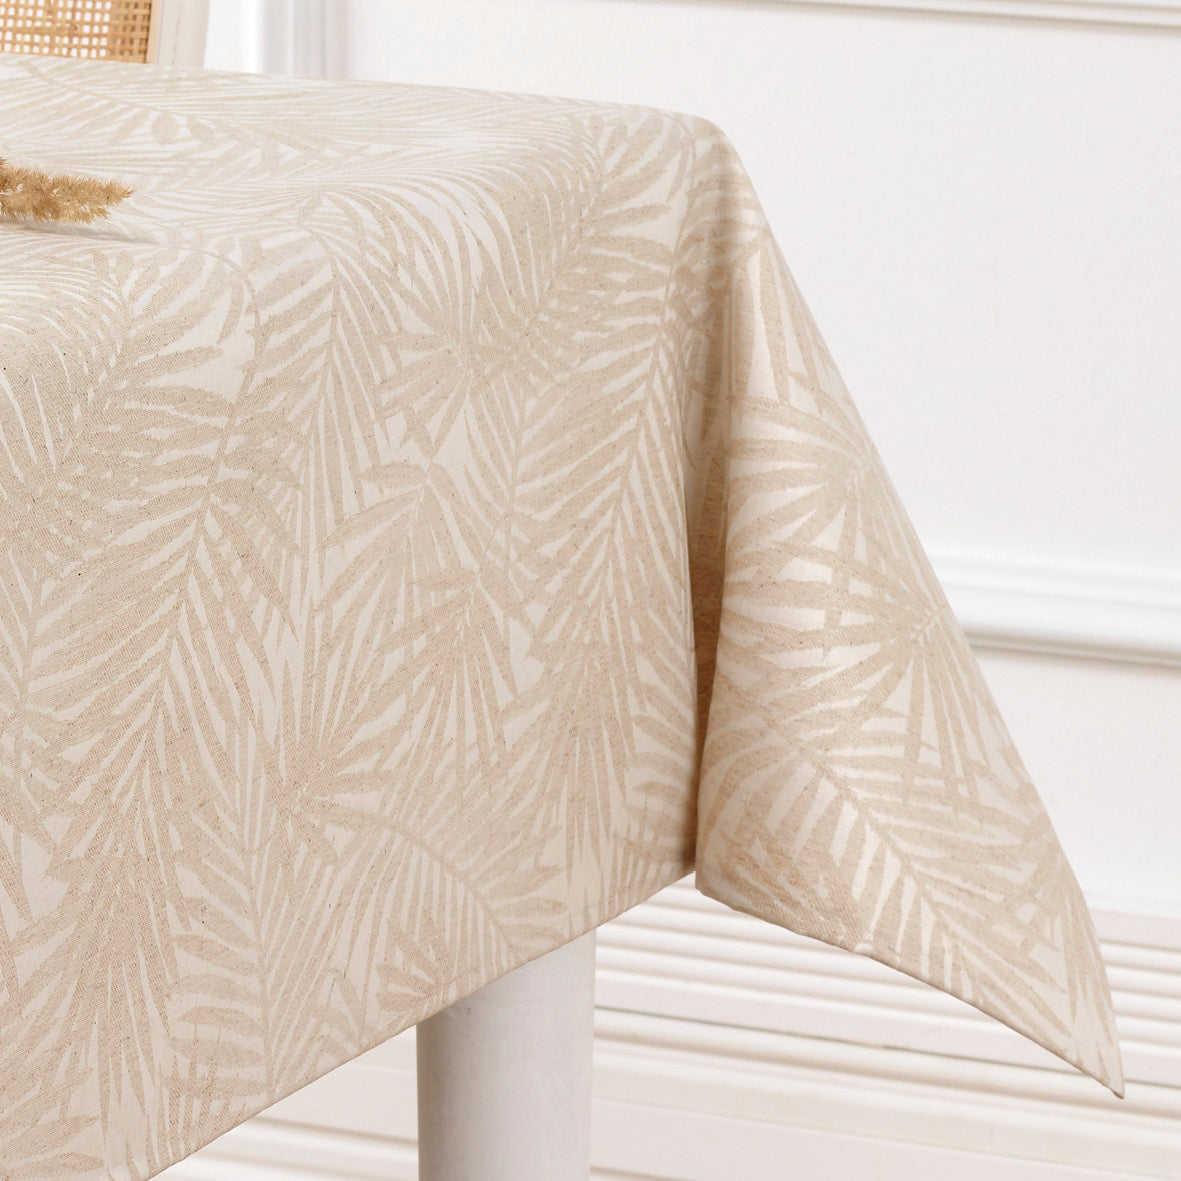 Tablecloth - Feuillage Tropical Taupe